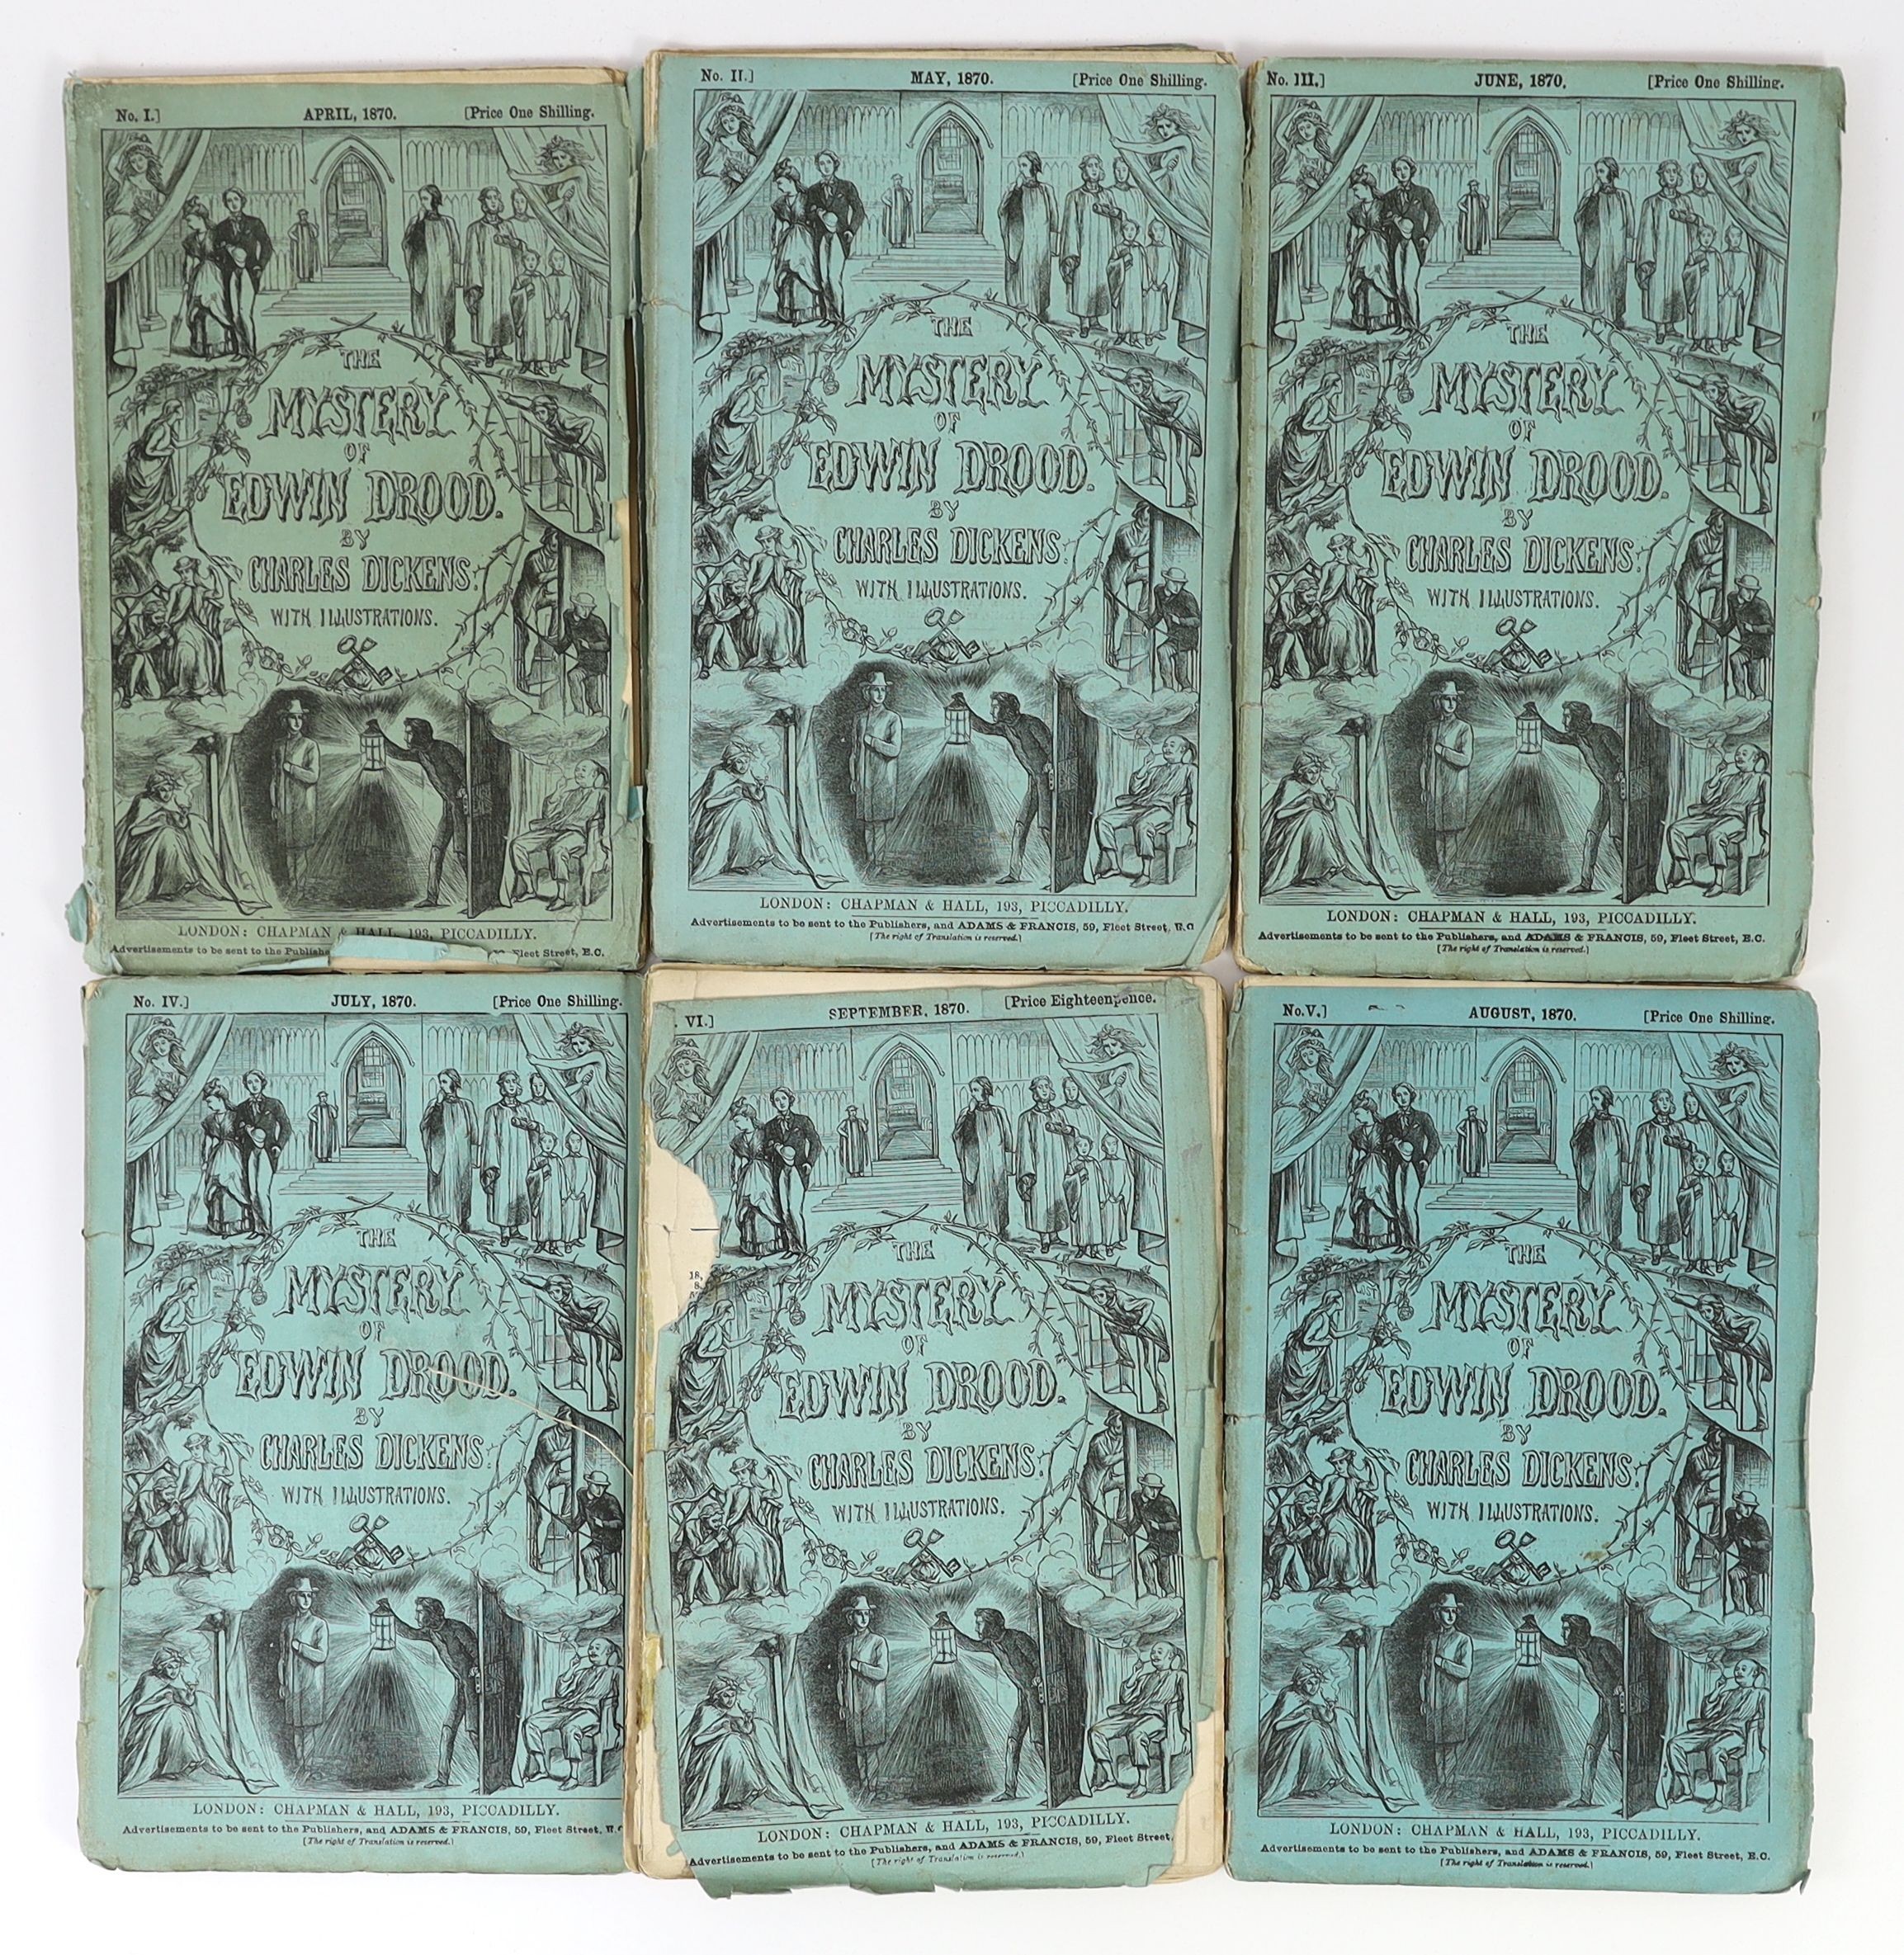 Dickens, Charles - The Mystery of Edwin Drood, 1st edition, in original 6 parts, original wraps, frayed and ragged, lacking portrait, London, 1870 - Sold not subject to return